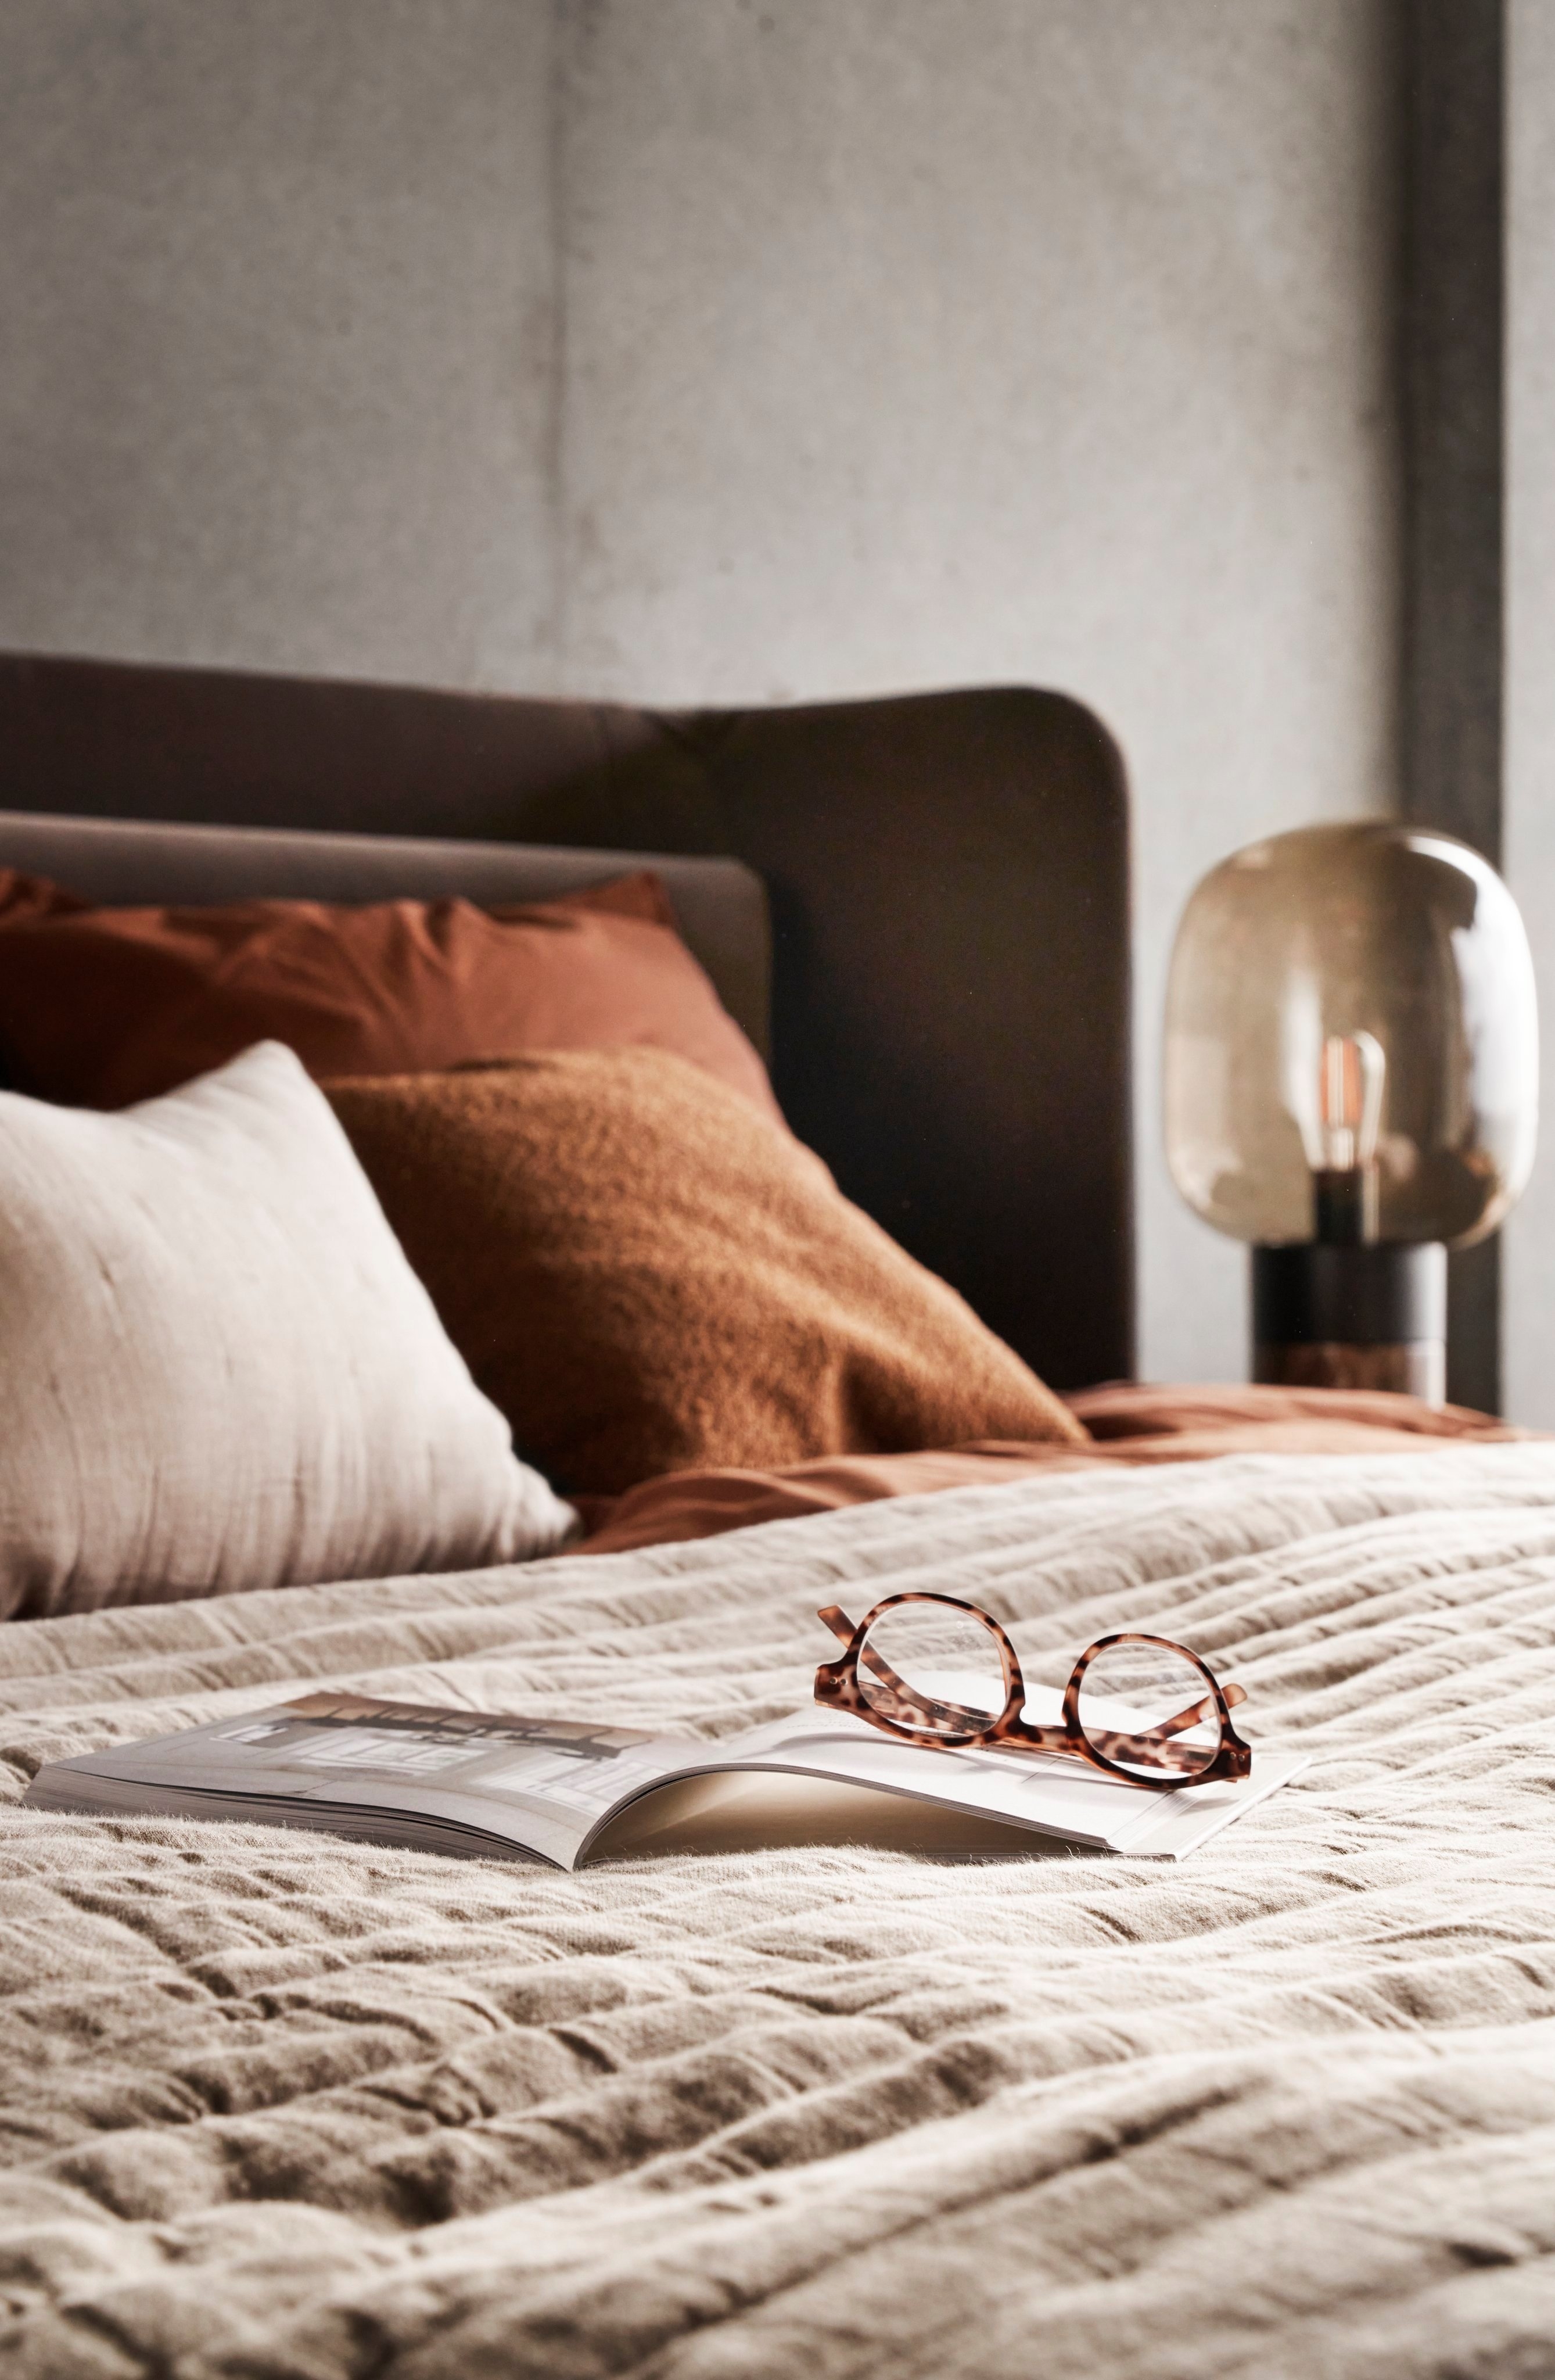 Bed with textured linens, glasses on open book, and soft bedside lighting.